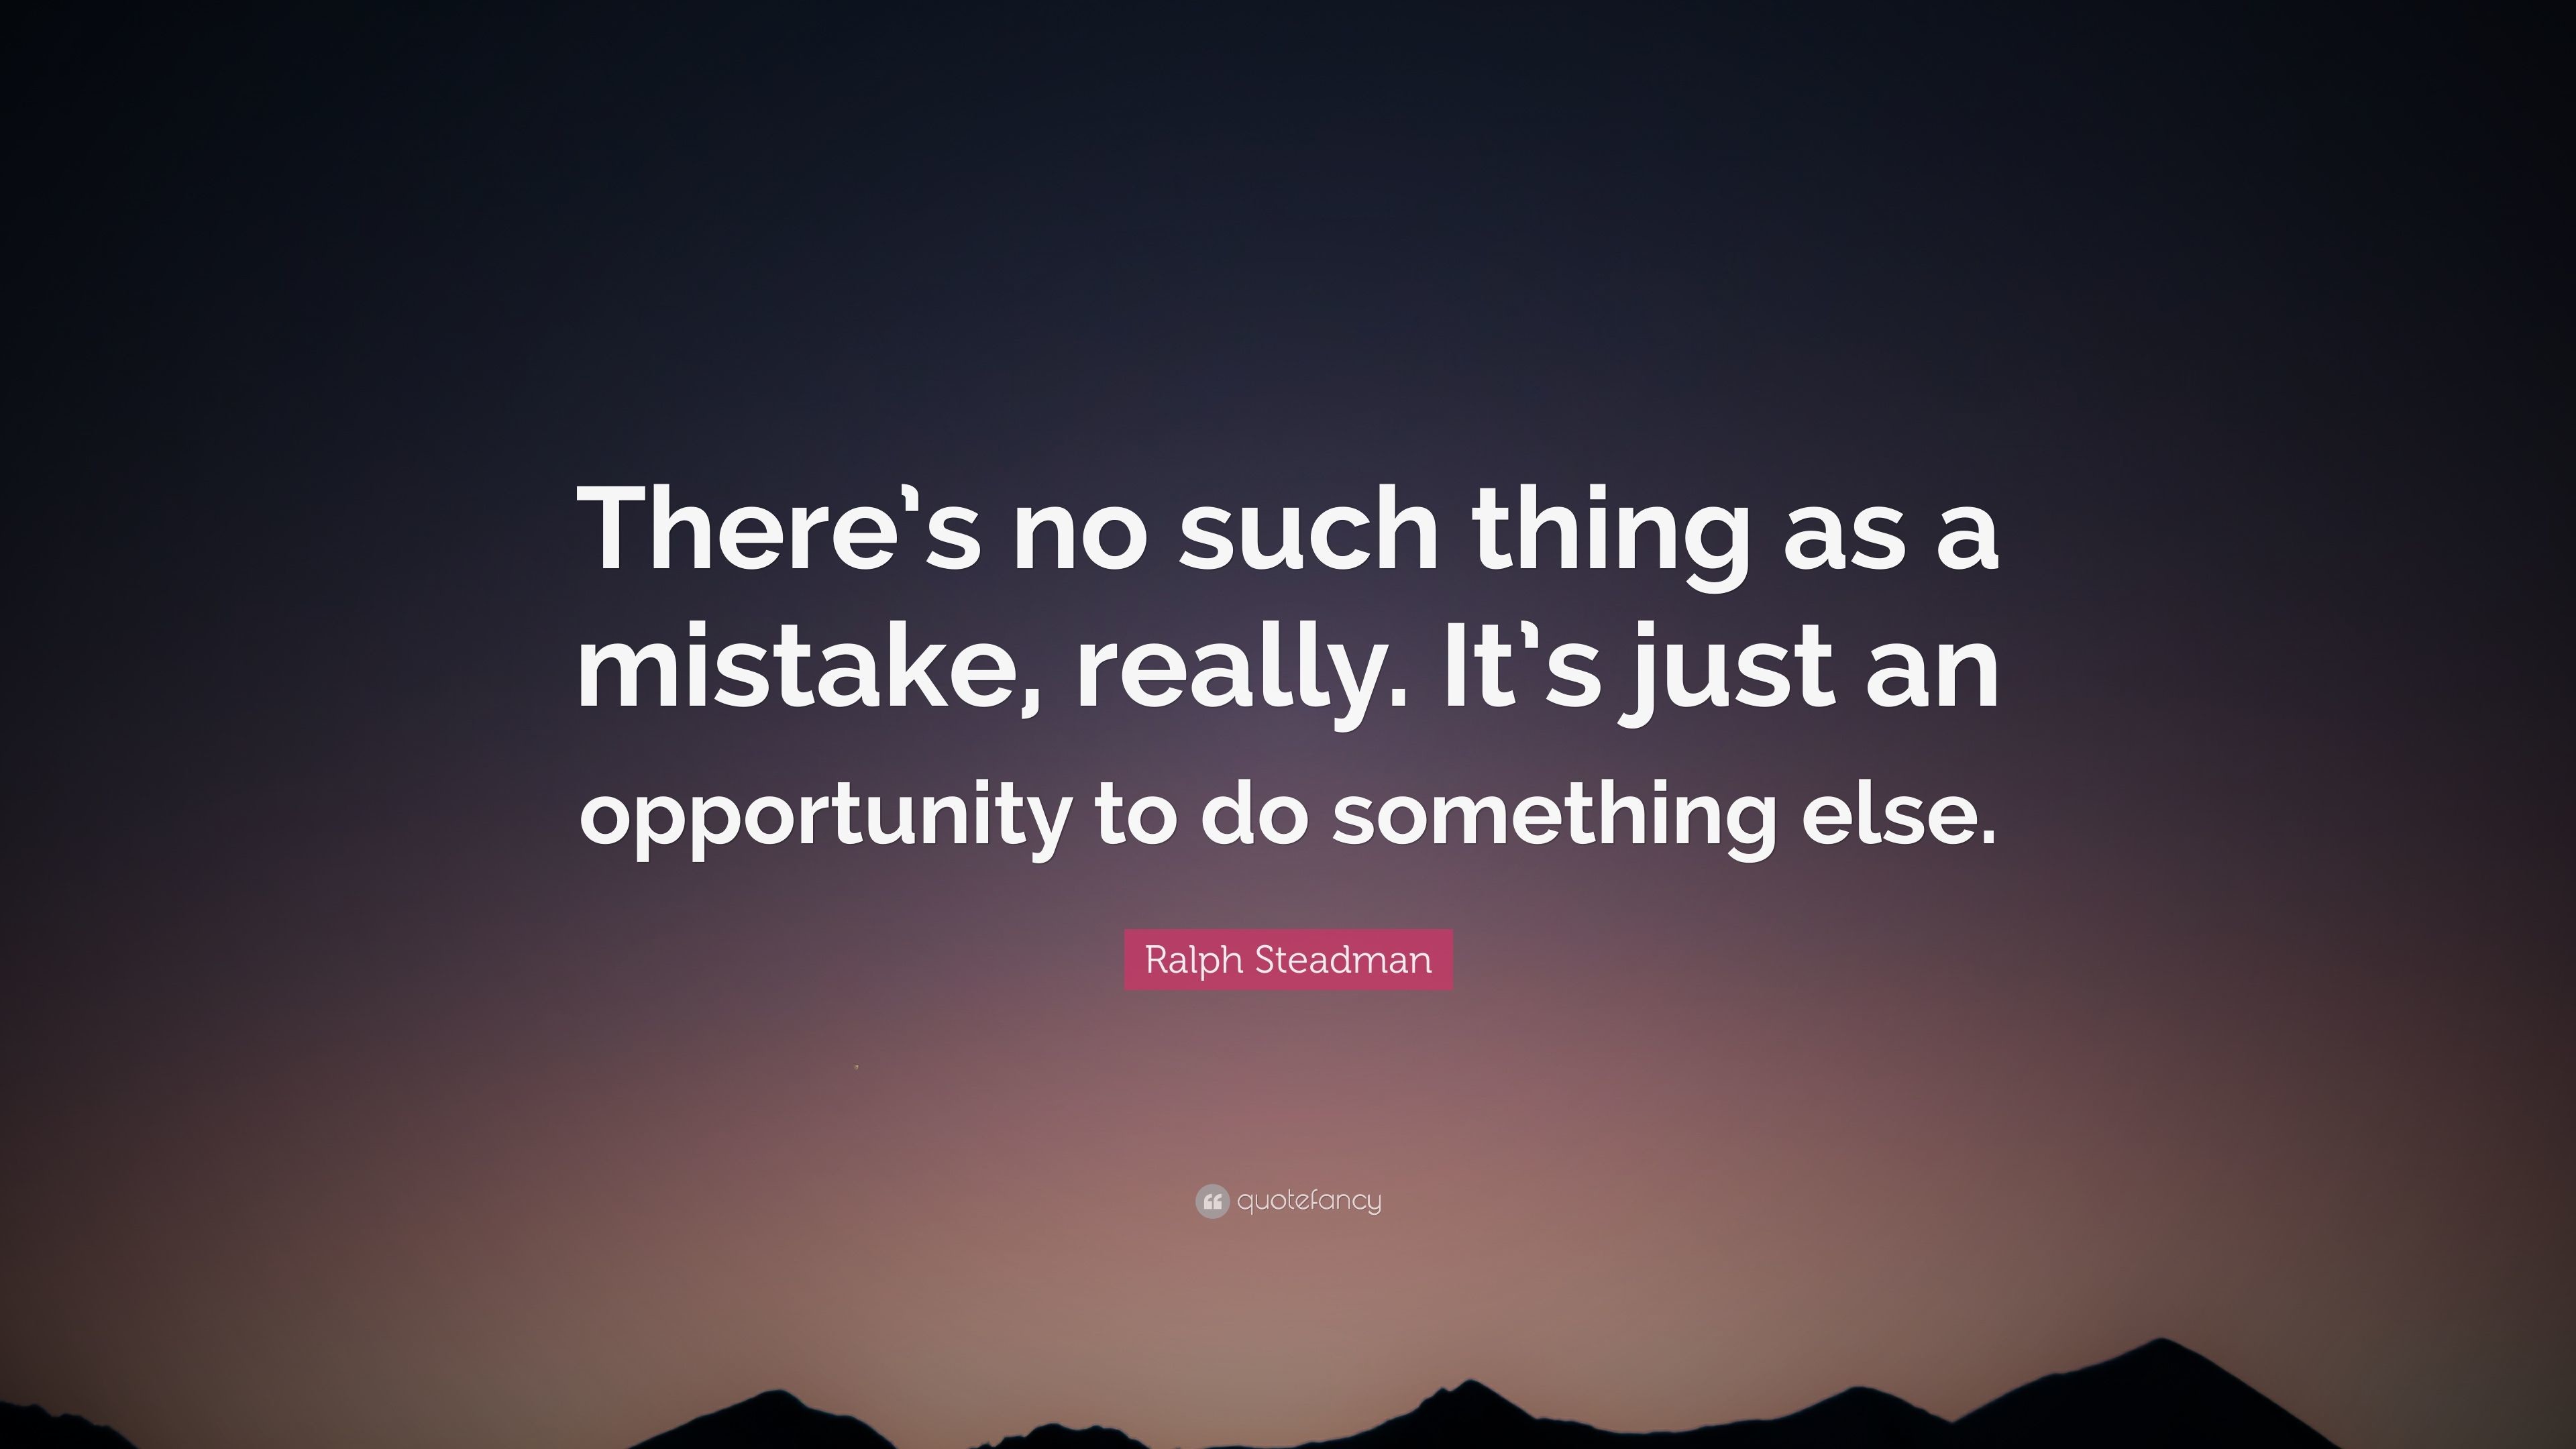 3840x2160 Ralph Steadman Quote: “There's no such thing as a mistake, really. It's